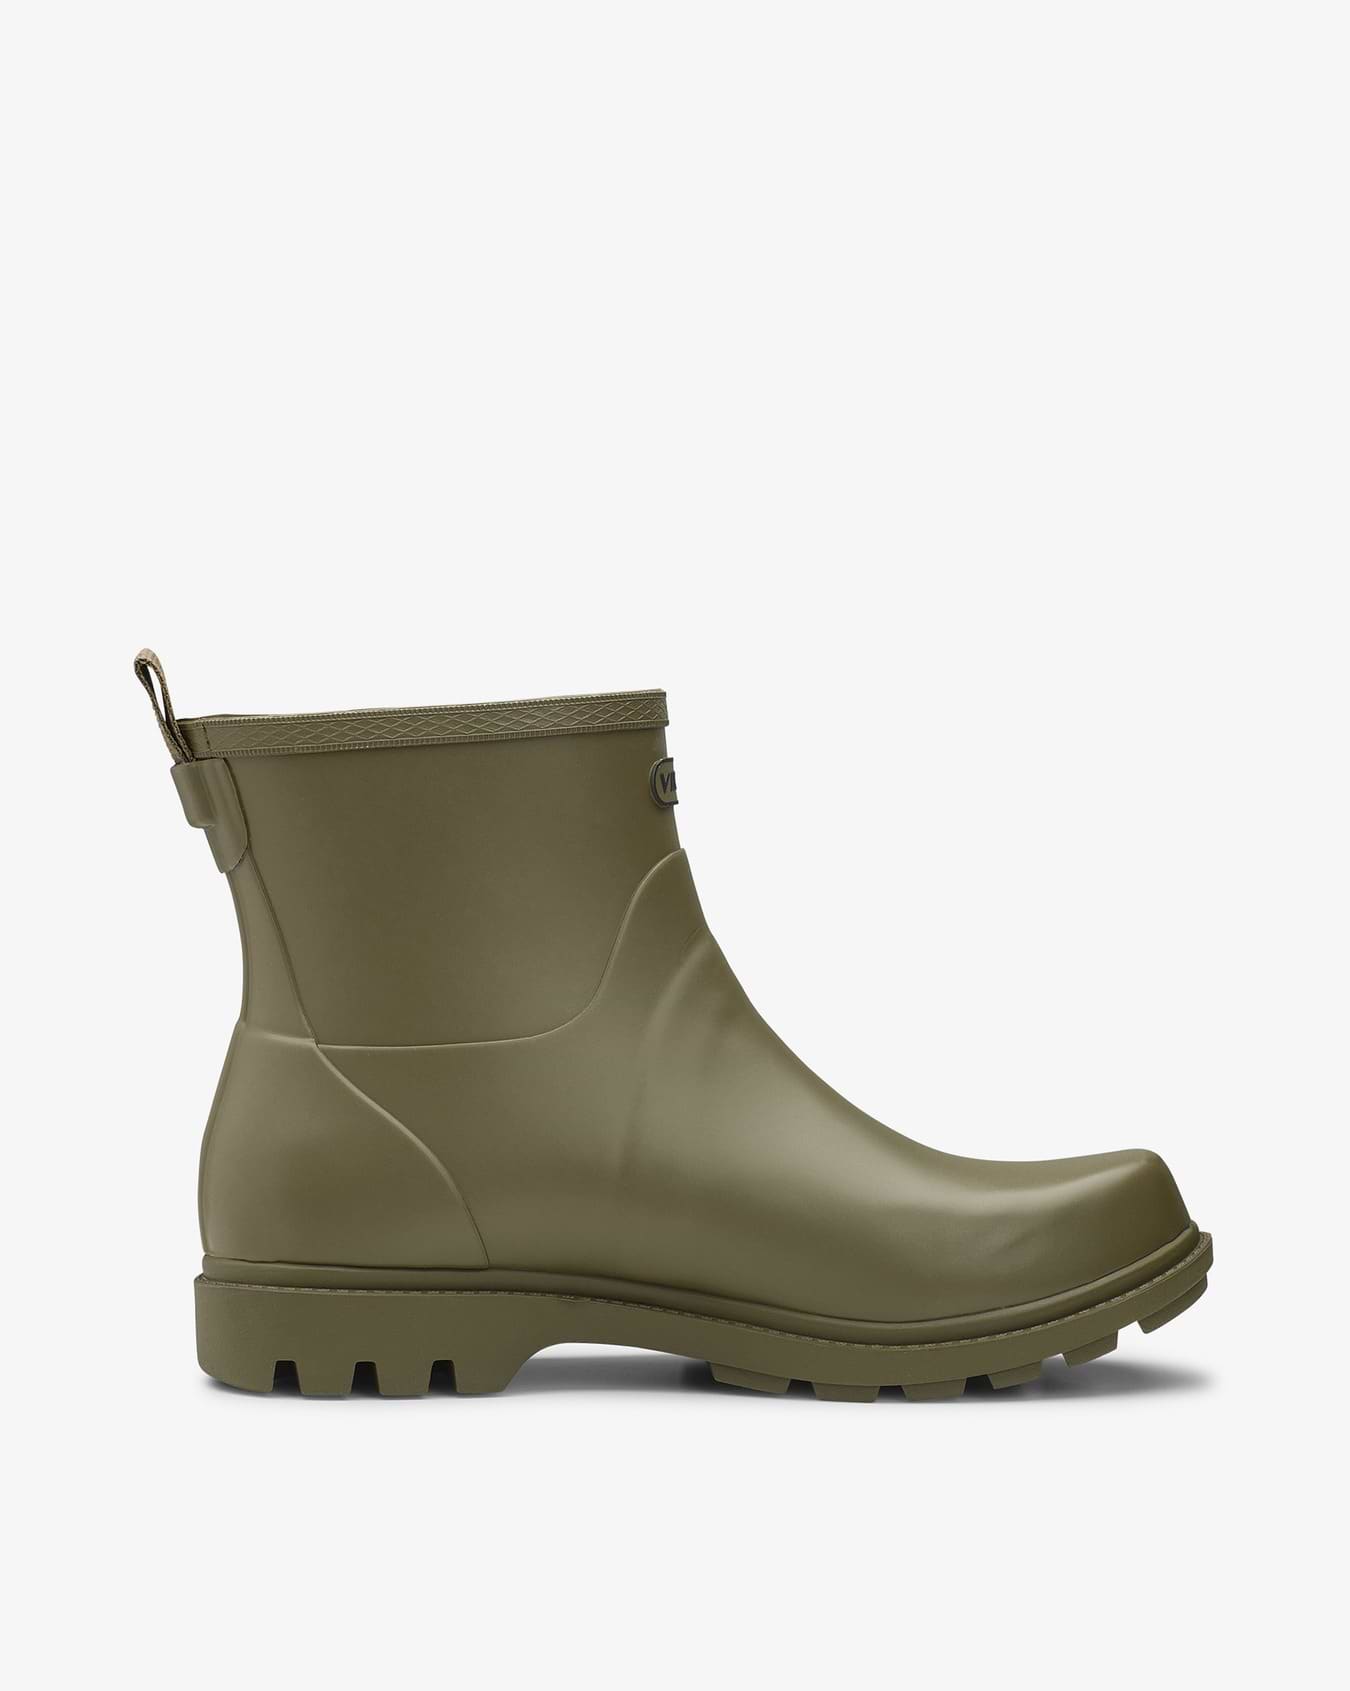 Viking Noble Green Rubber Boot